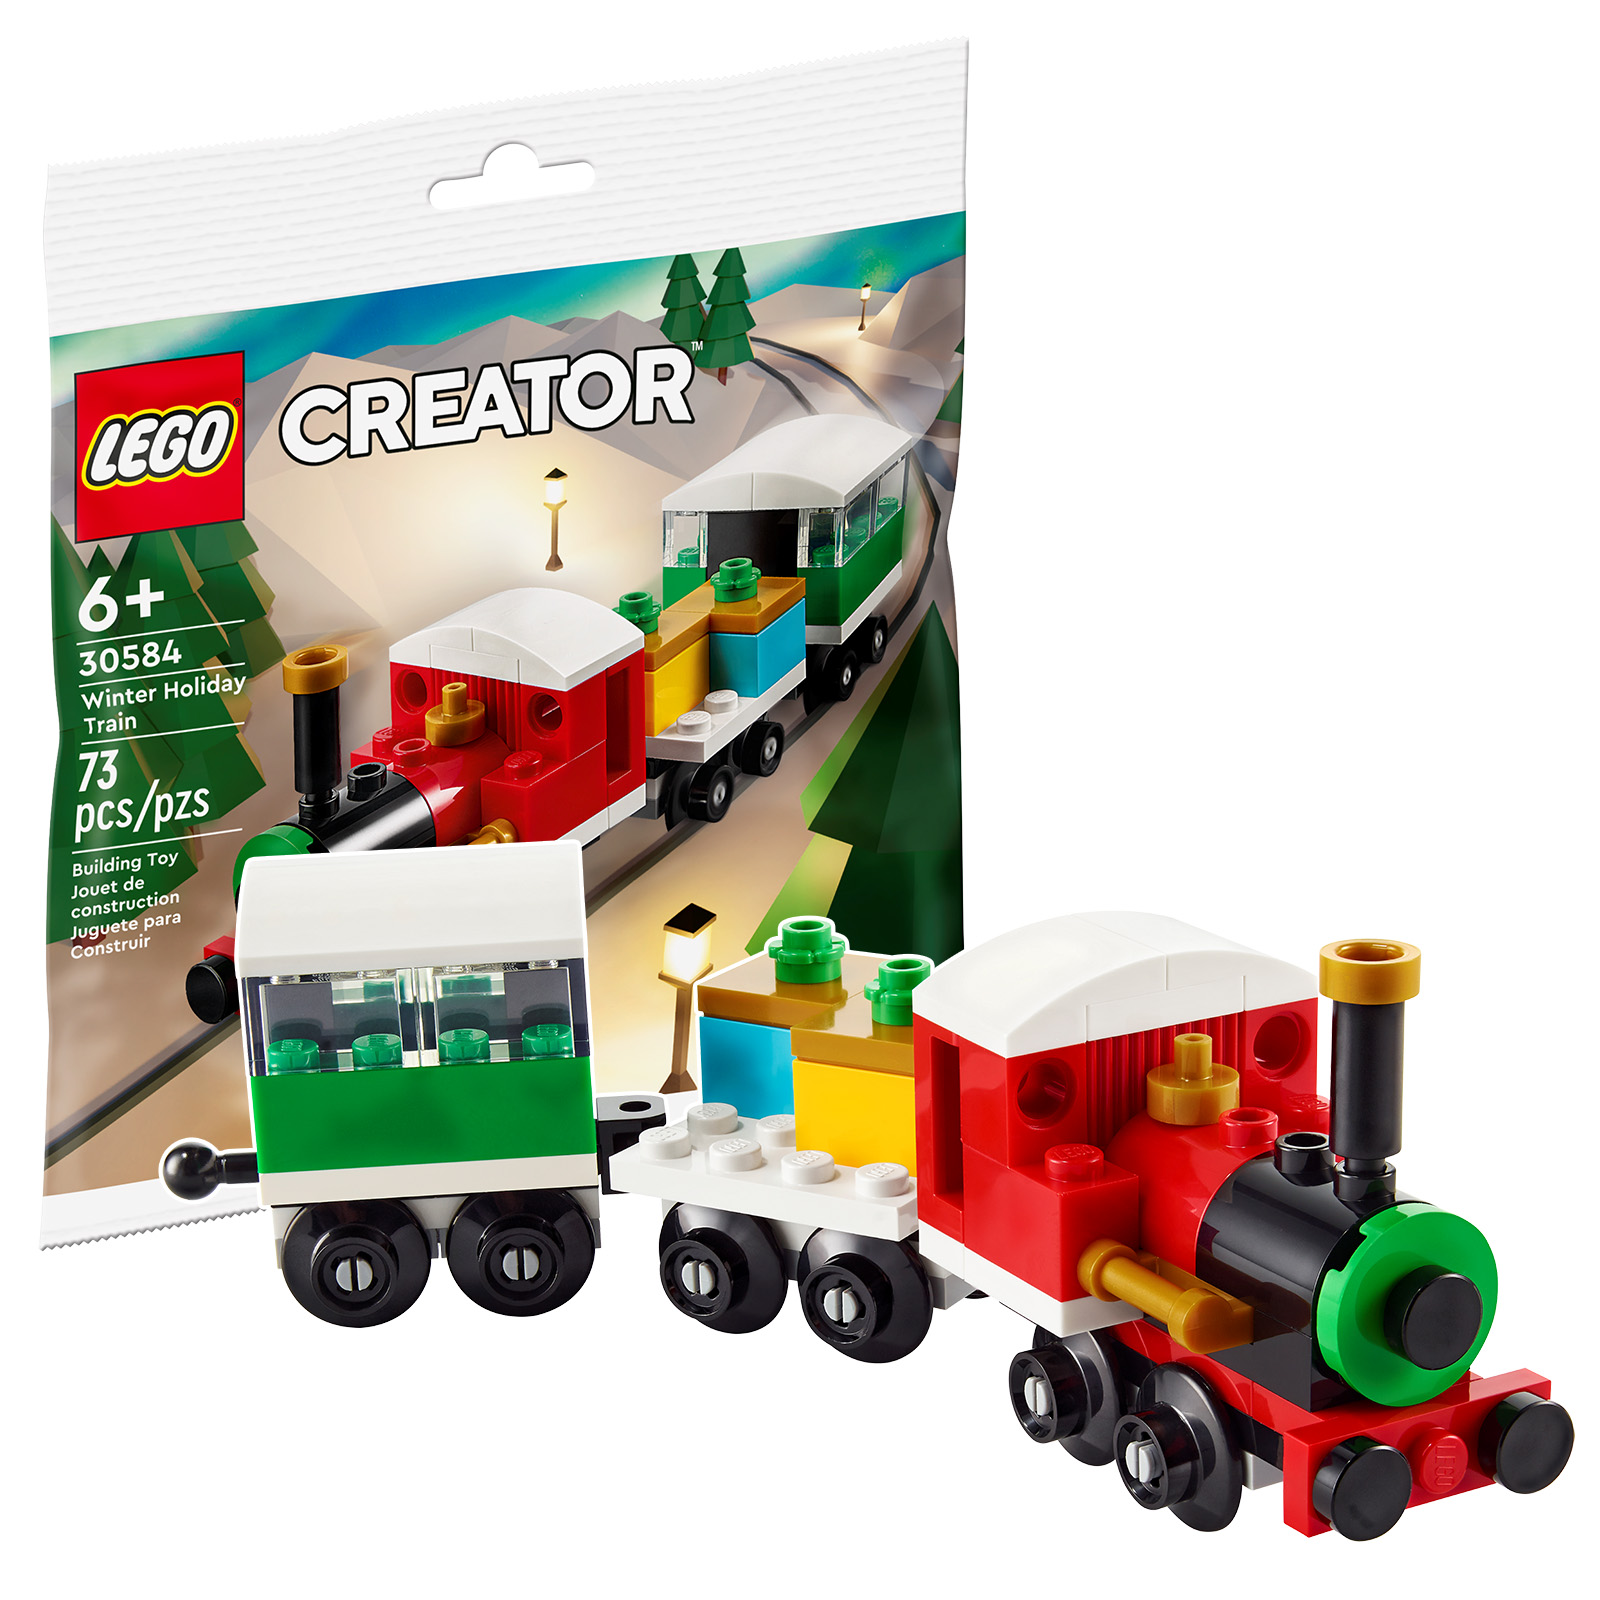 UK-only] Exclusive LEGO Promo Code - get a free 40578 Sandwich